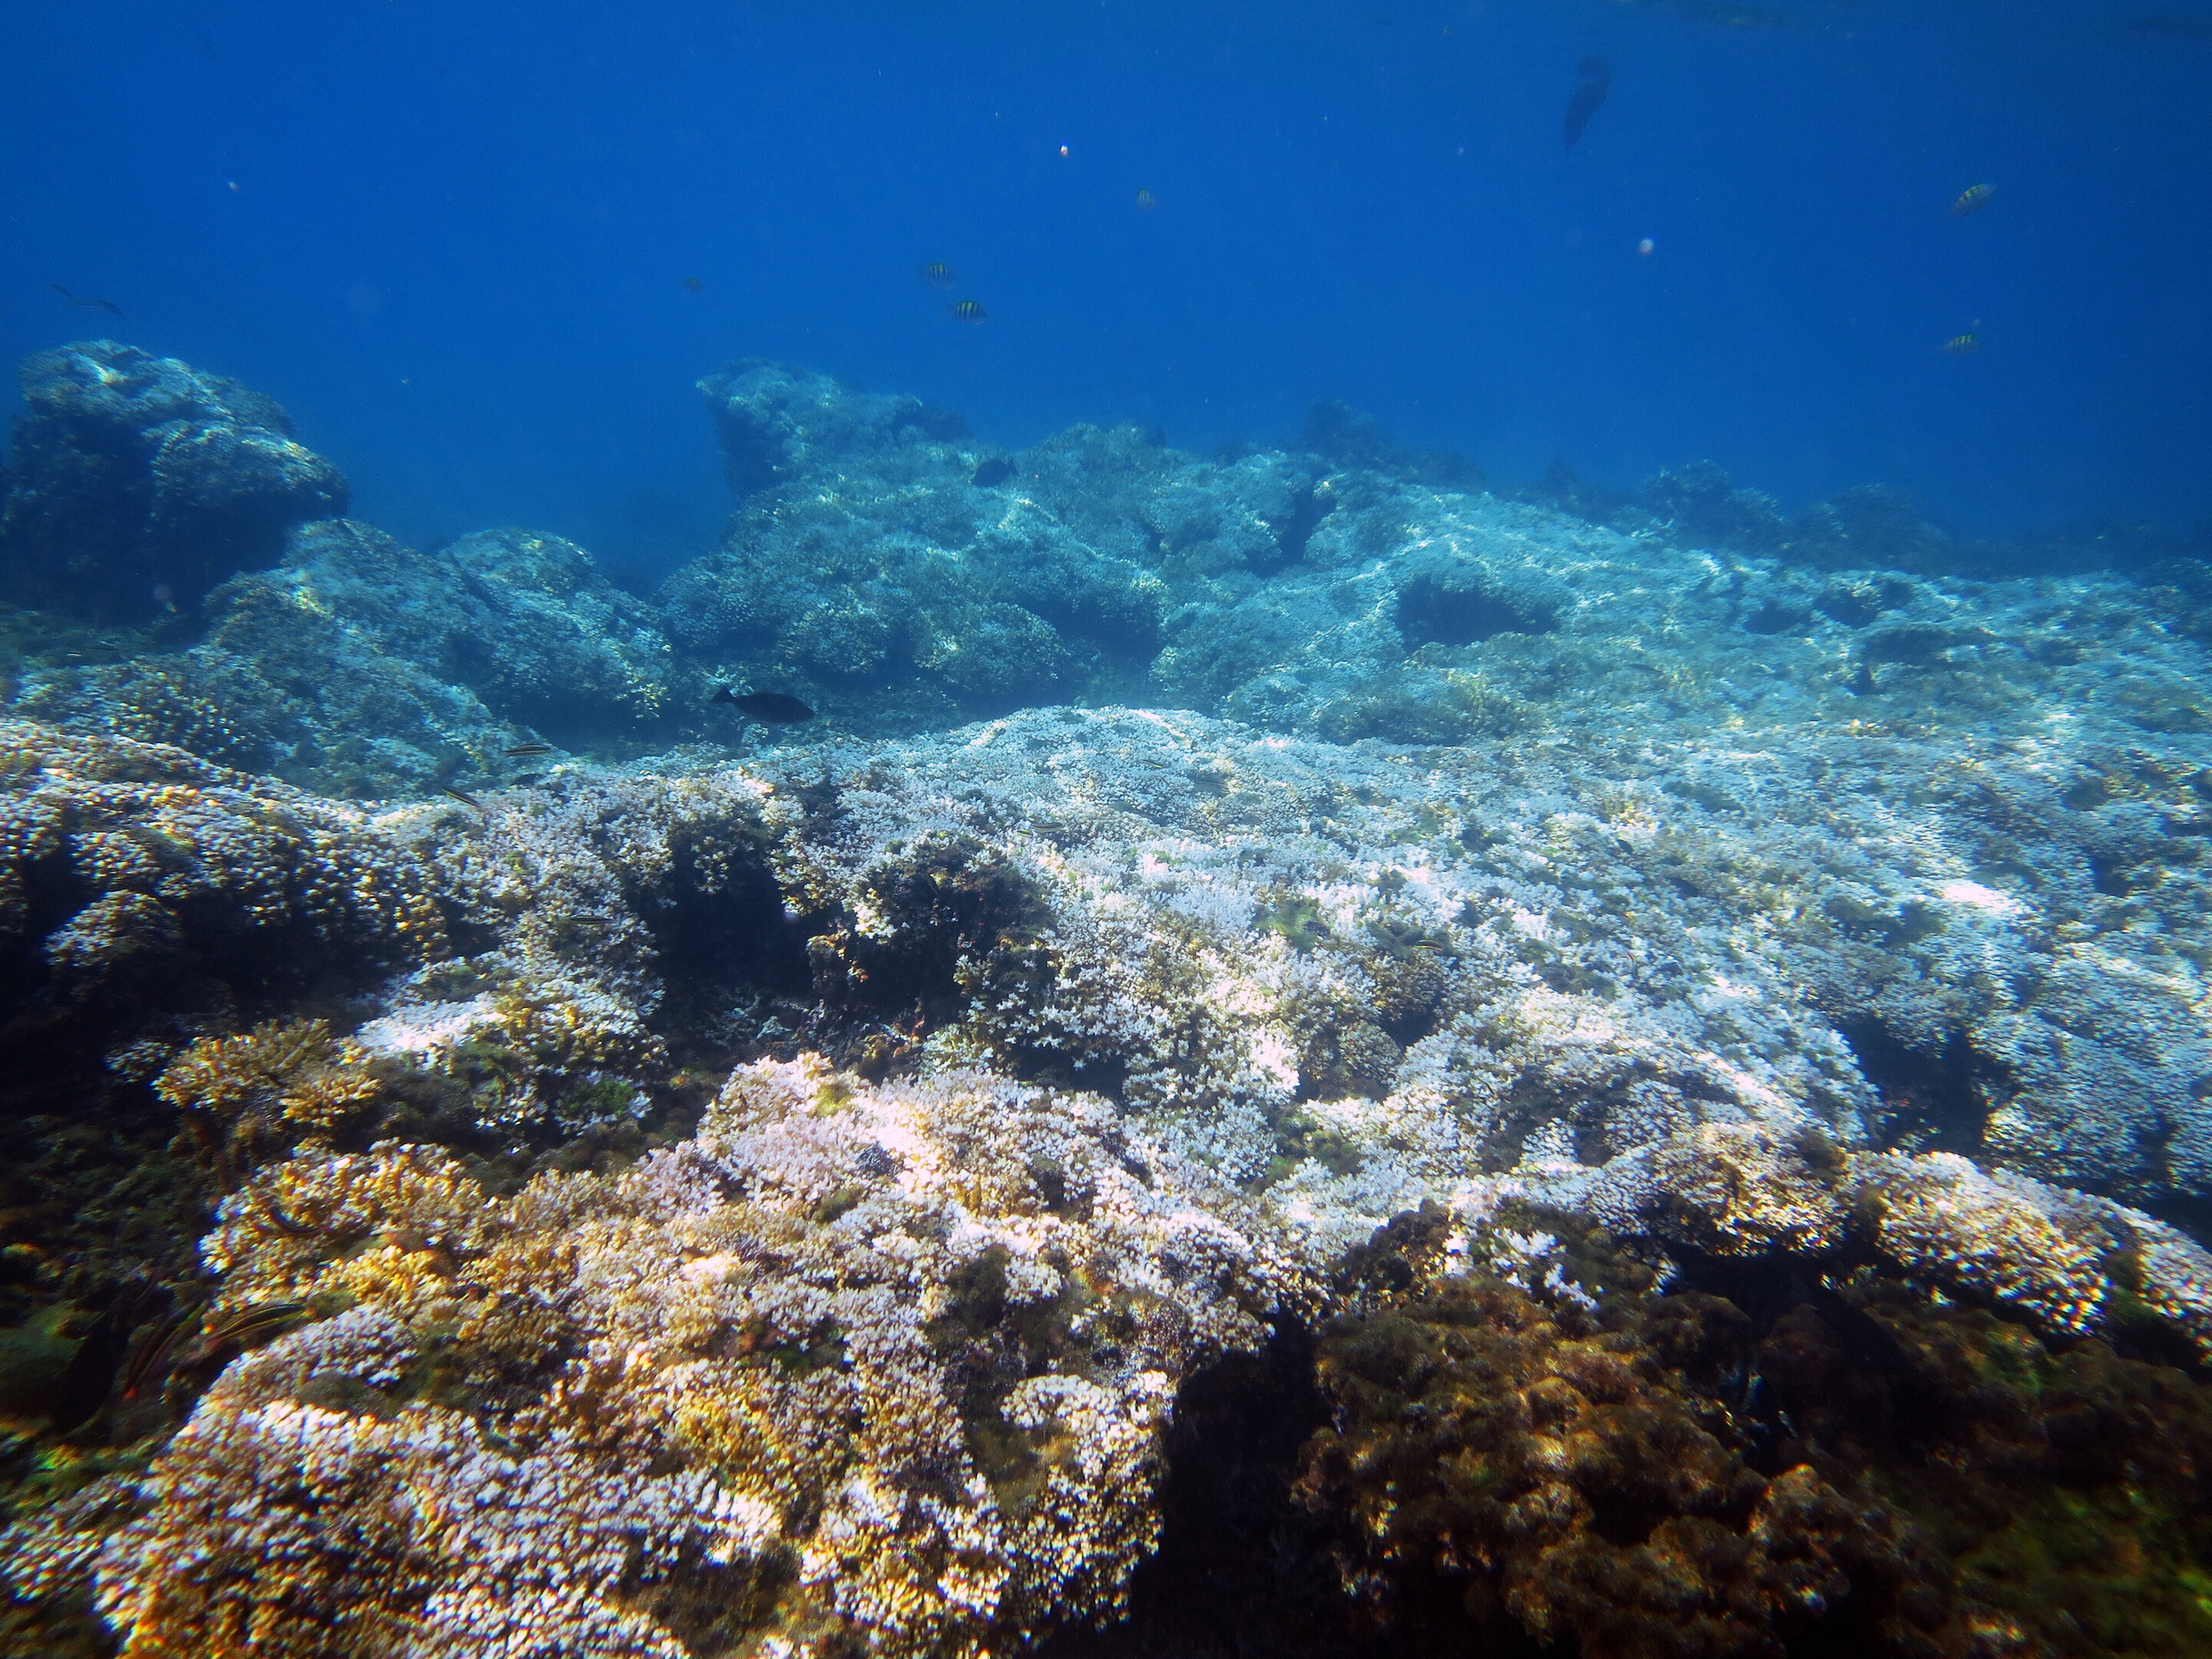 New research finds ocean warming forces reefs into cool-water refuges - Phys.Org